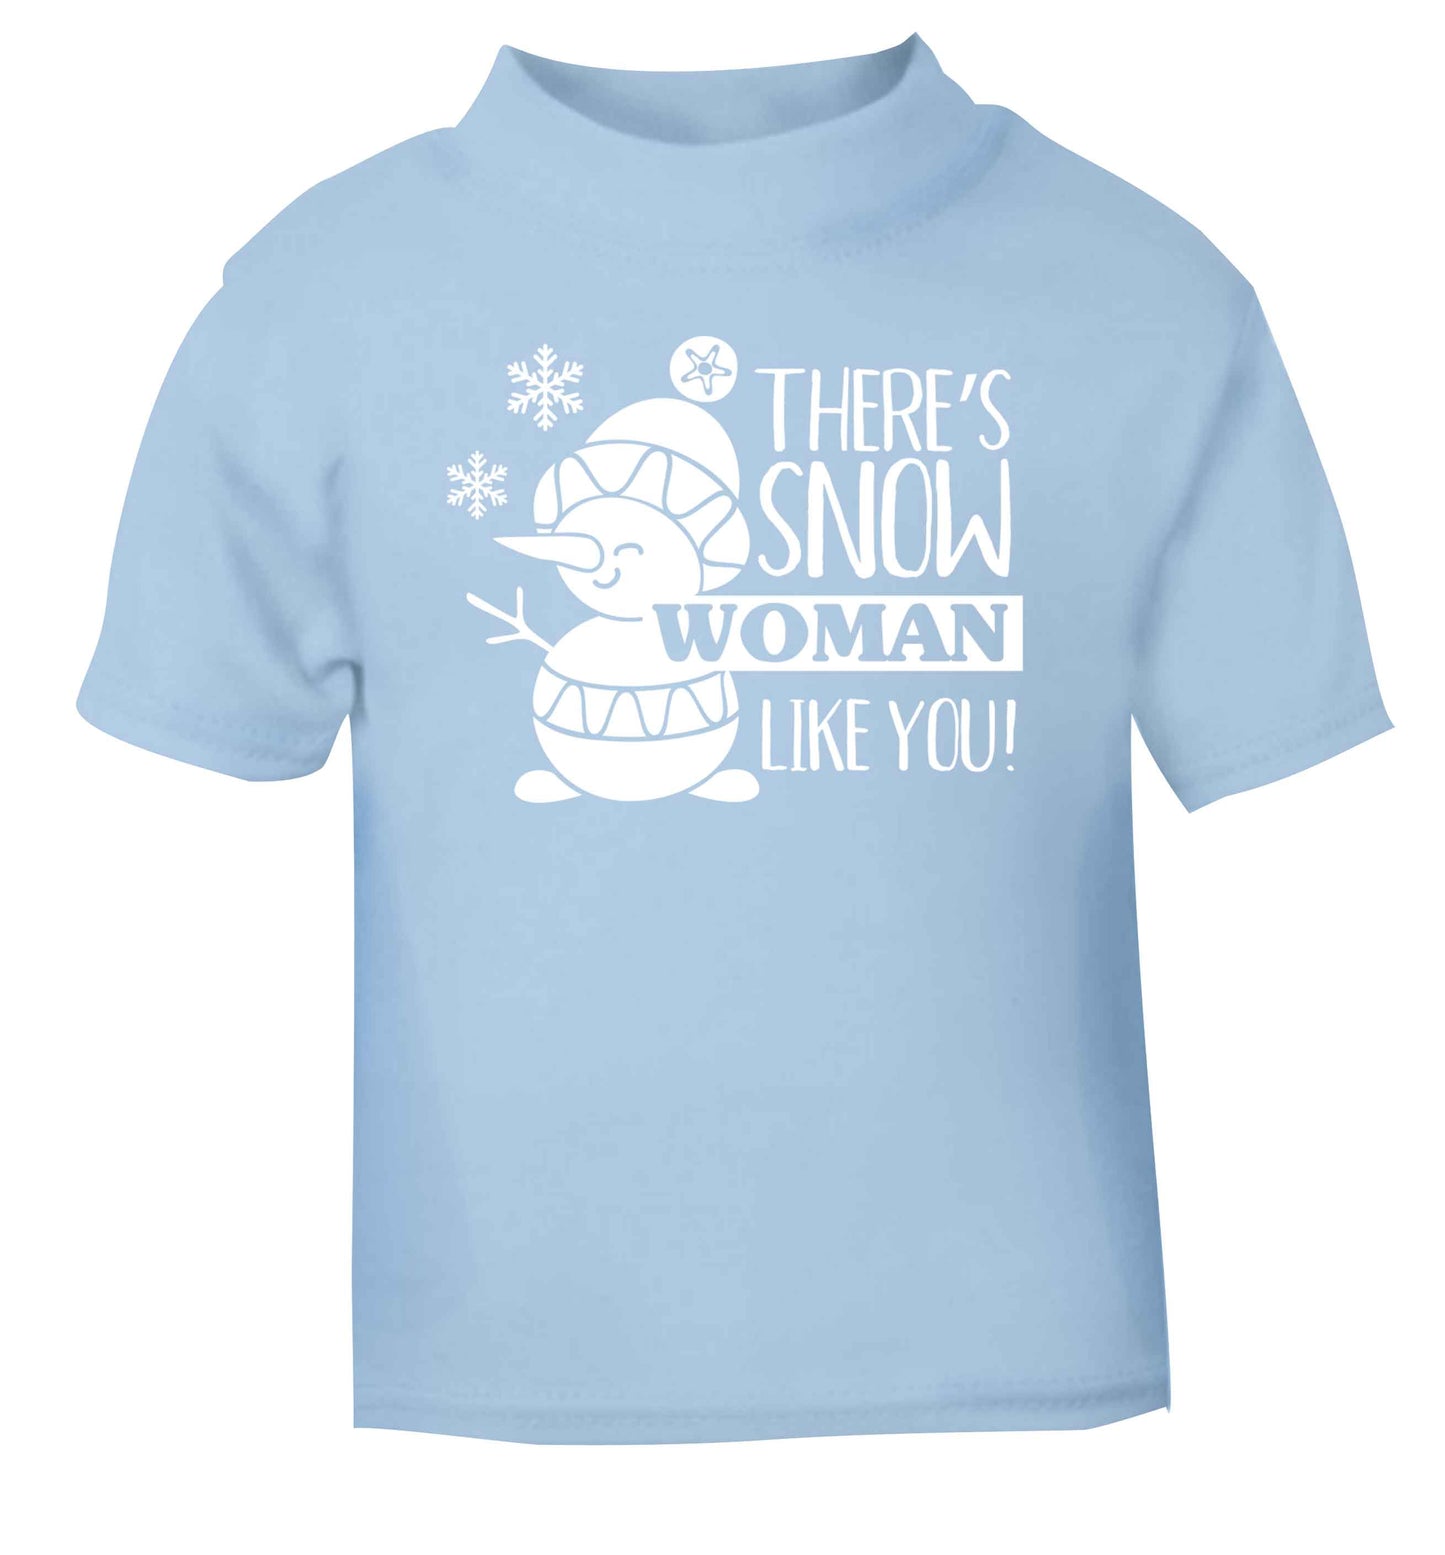 There's snow woman like you light blue baby toddler Tshirt 2 Years